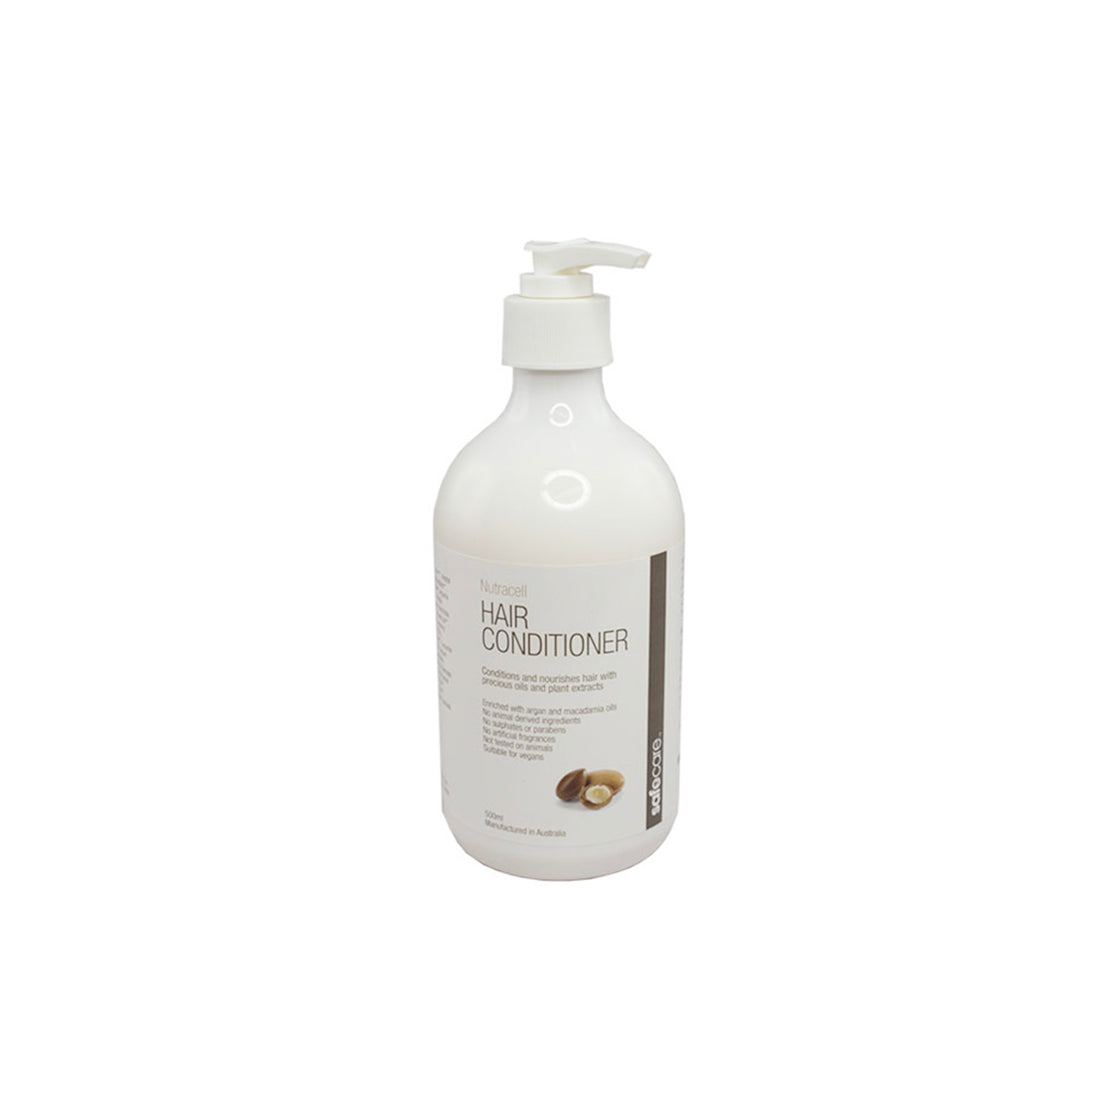 Nutracell Hair Conditioner 500ml